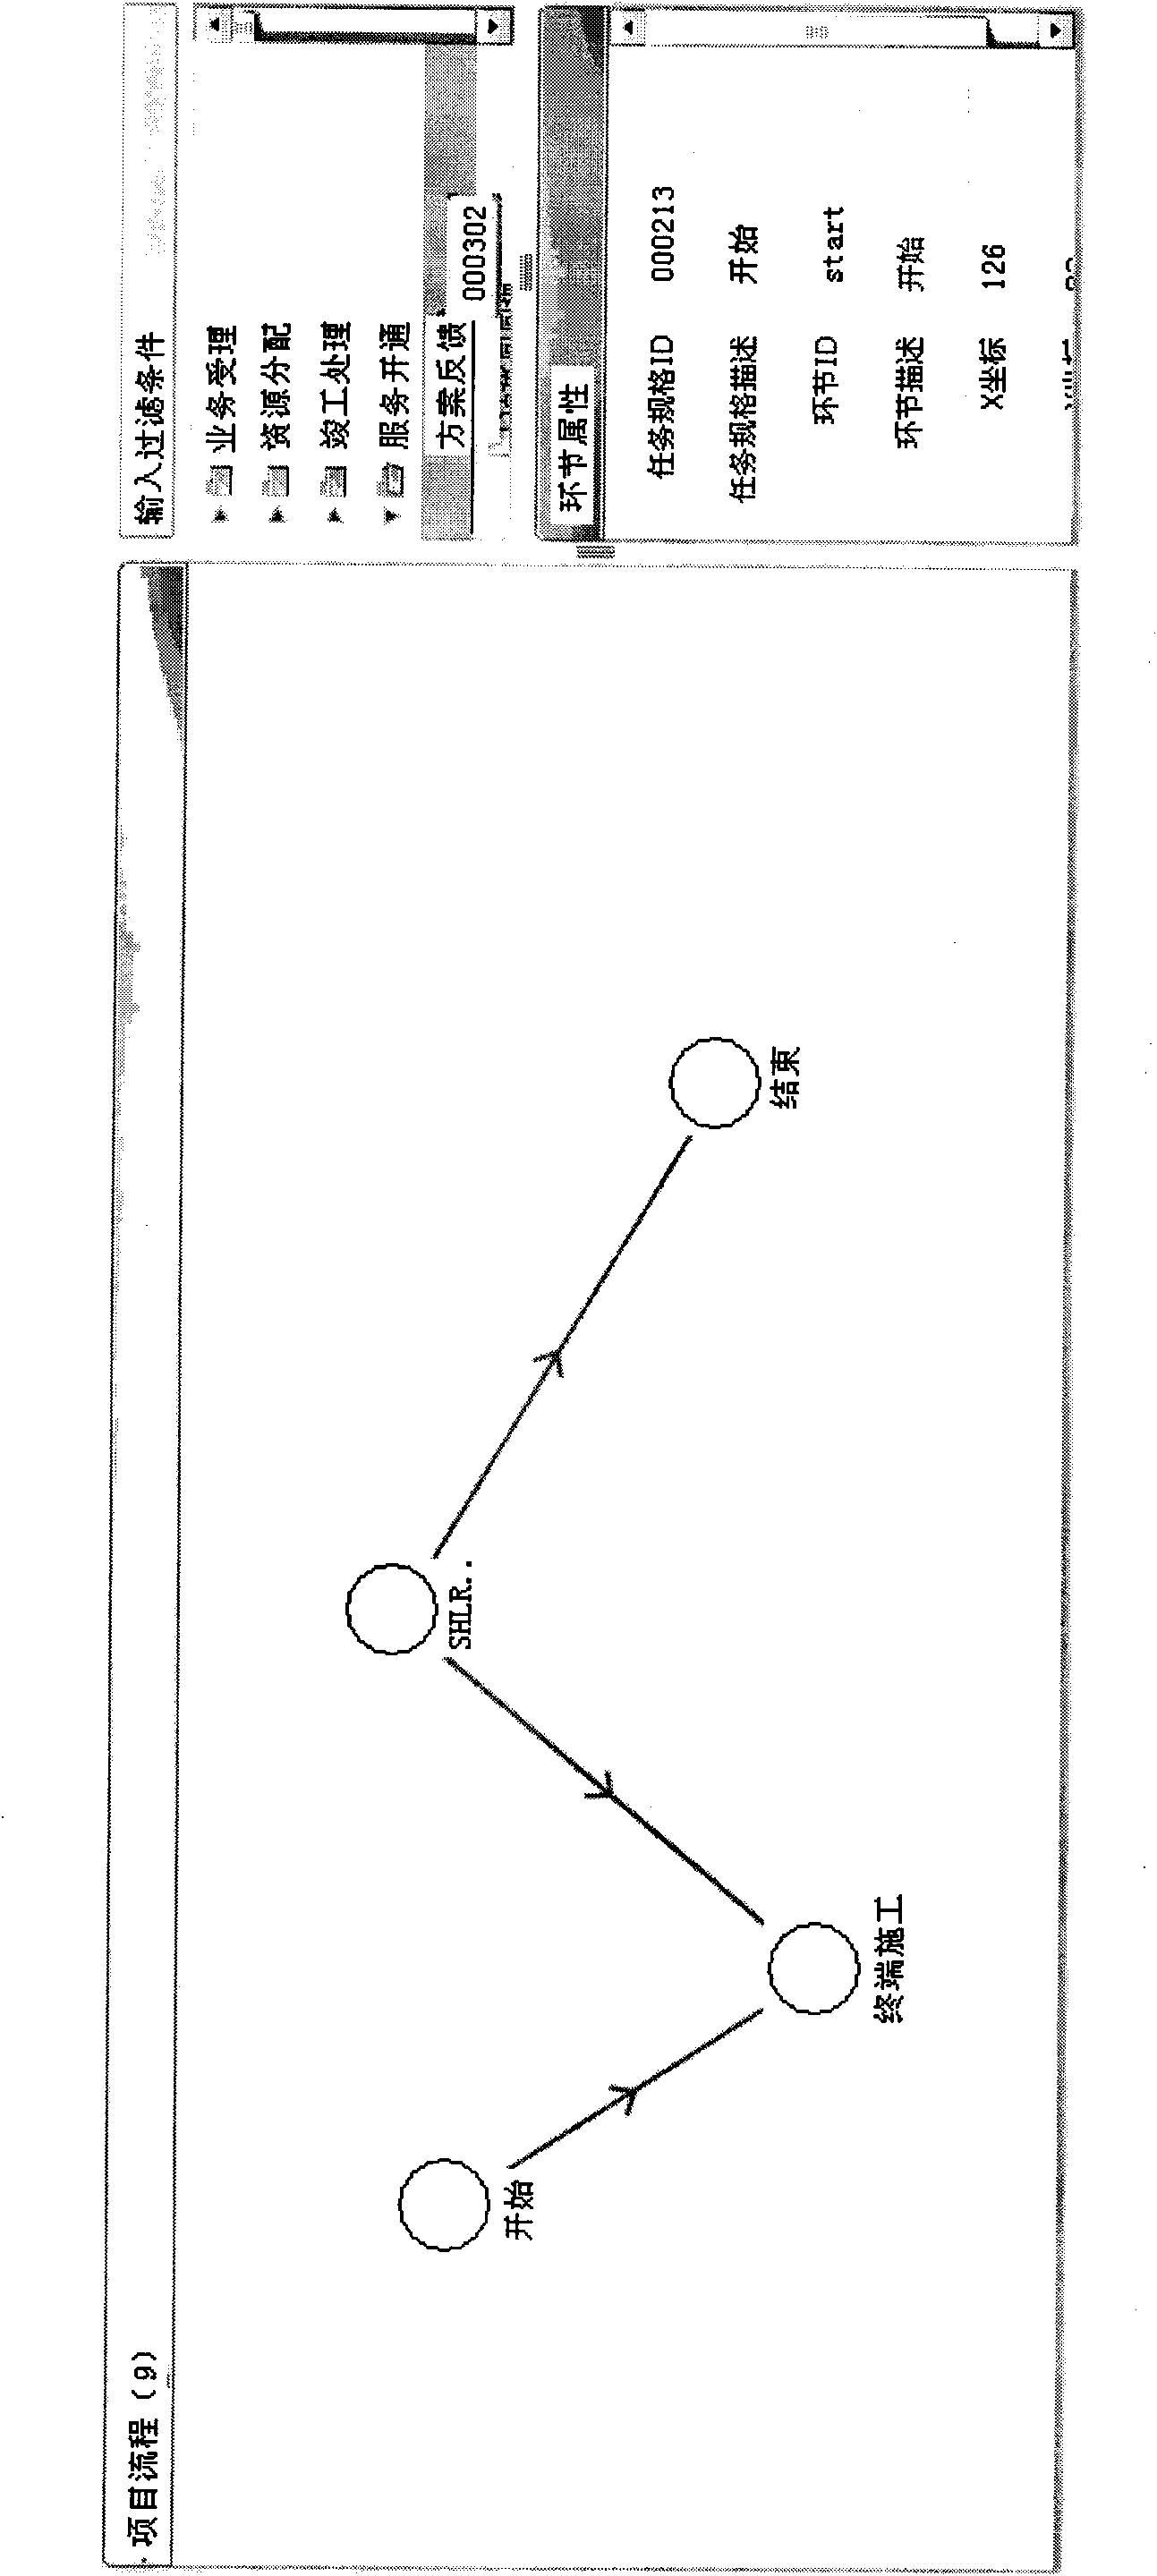 Graphic flow template drafting method under ARP frame